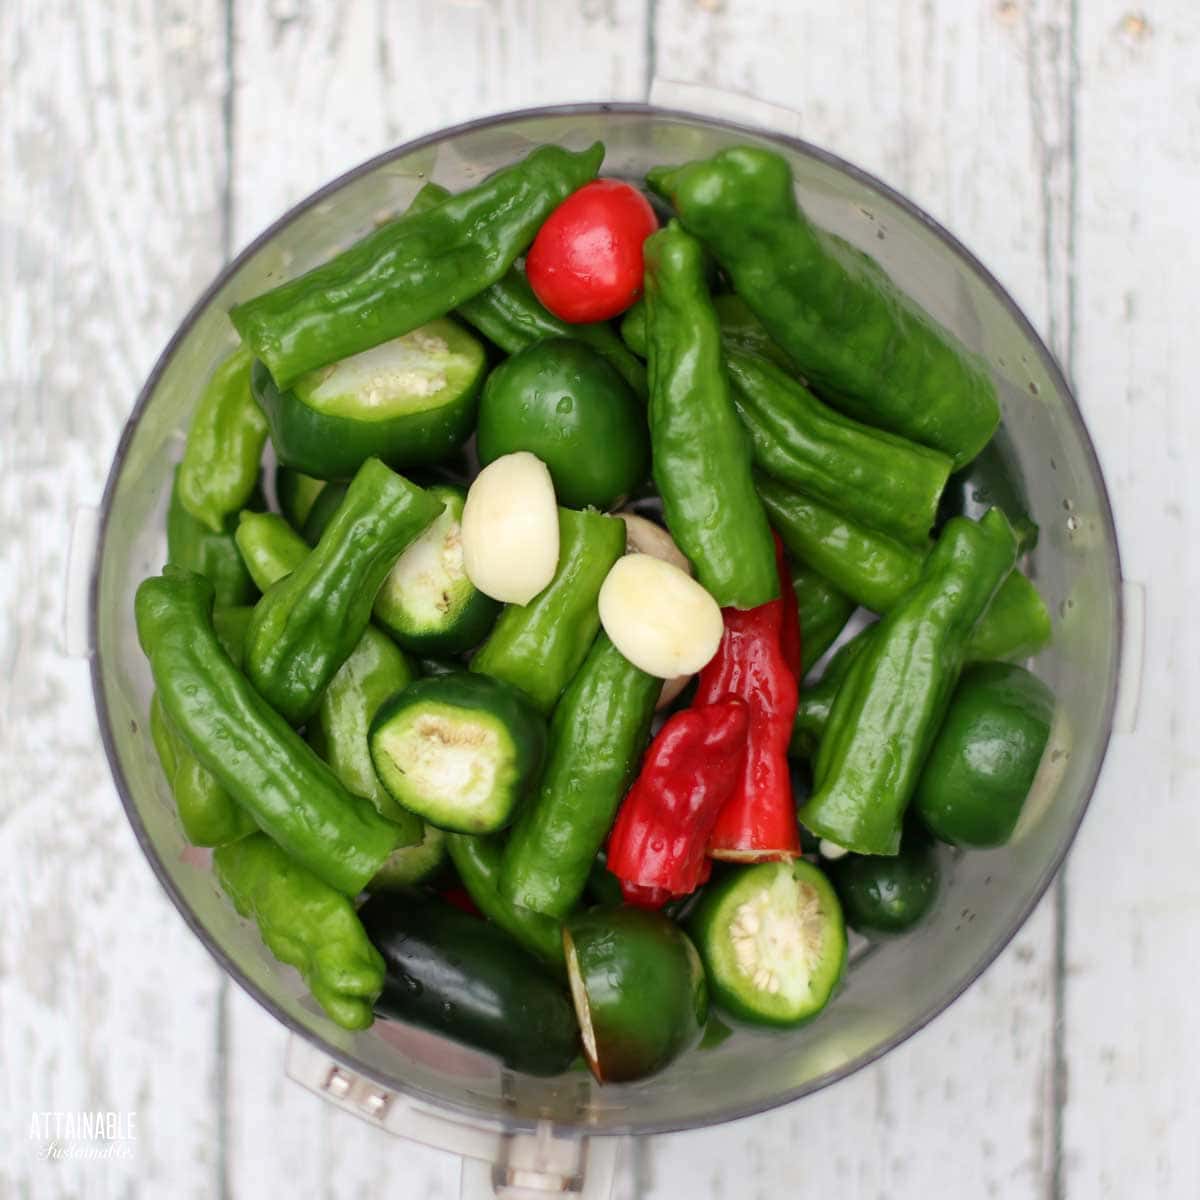 green and red peppers in a food processor bowl